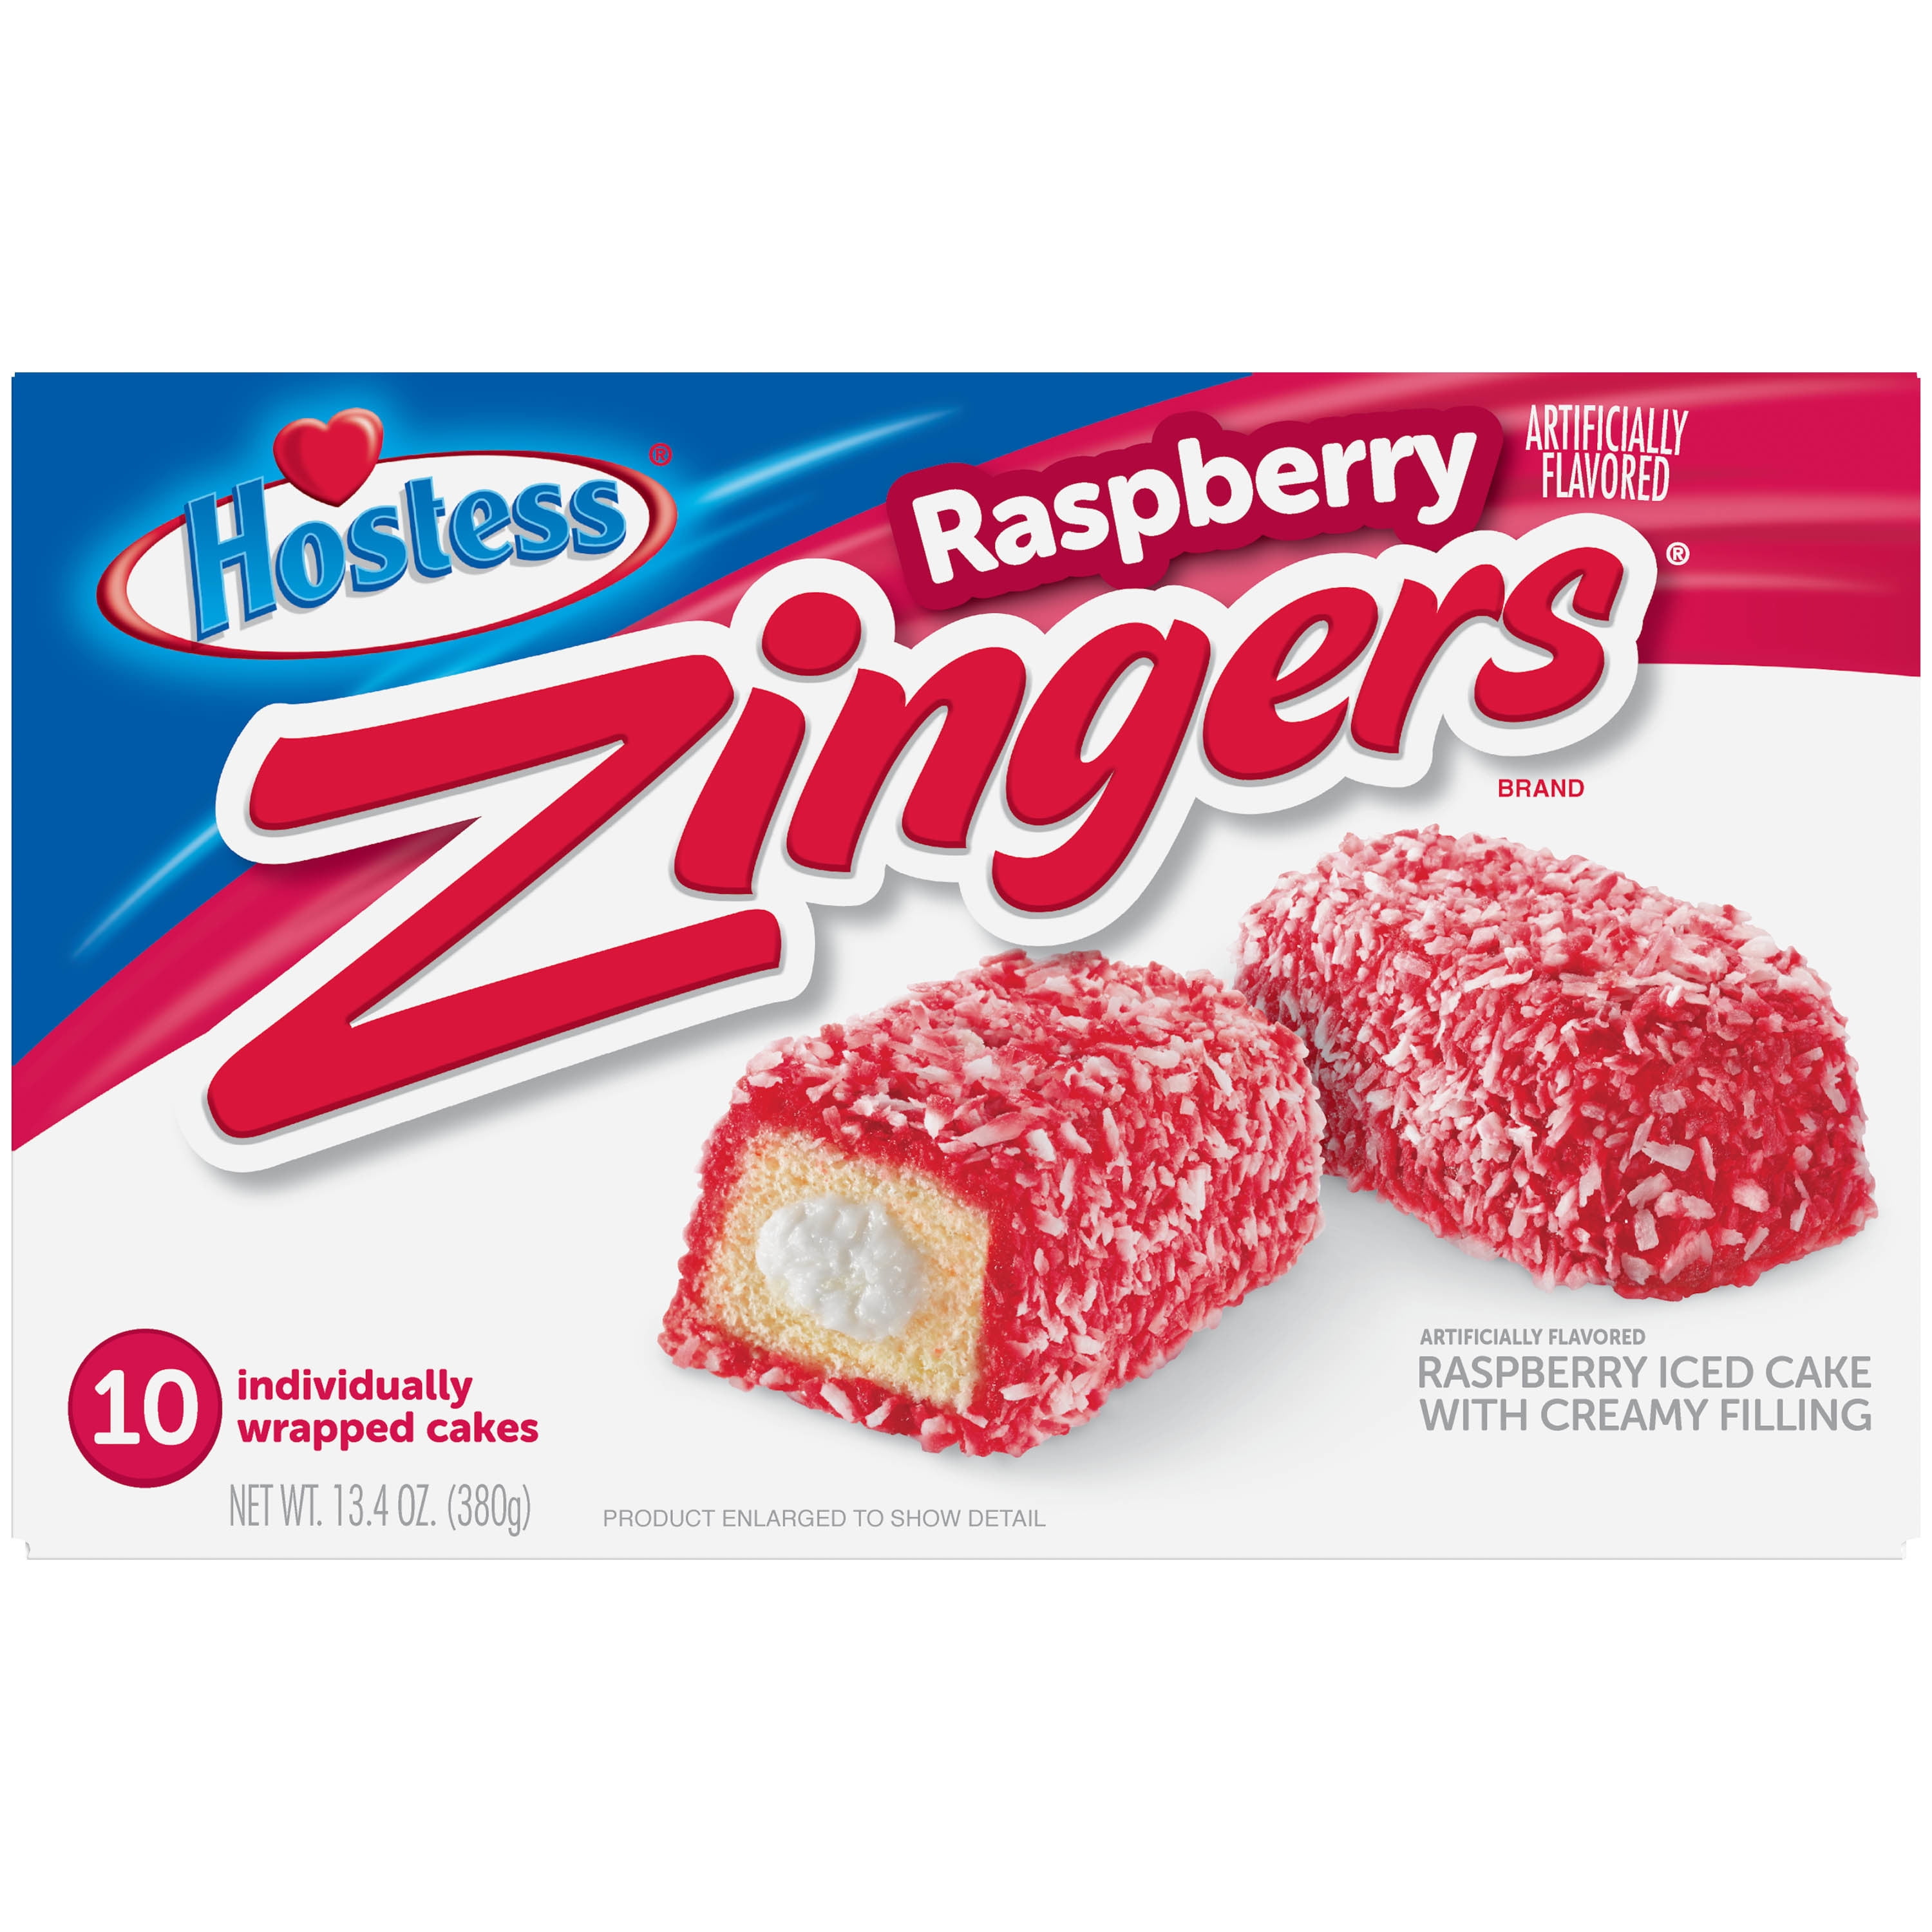 Hostess Raspberry Zingers are an iced raspberry artificially flavored cake ...